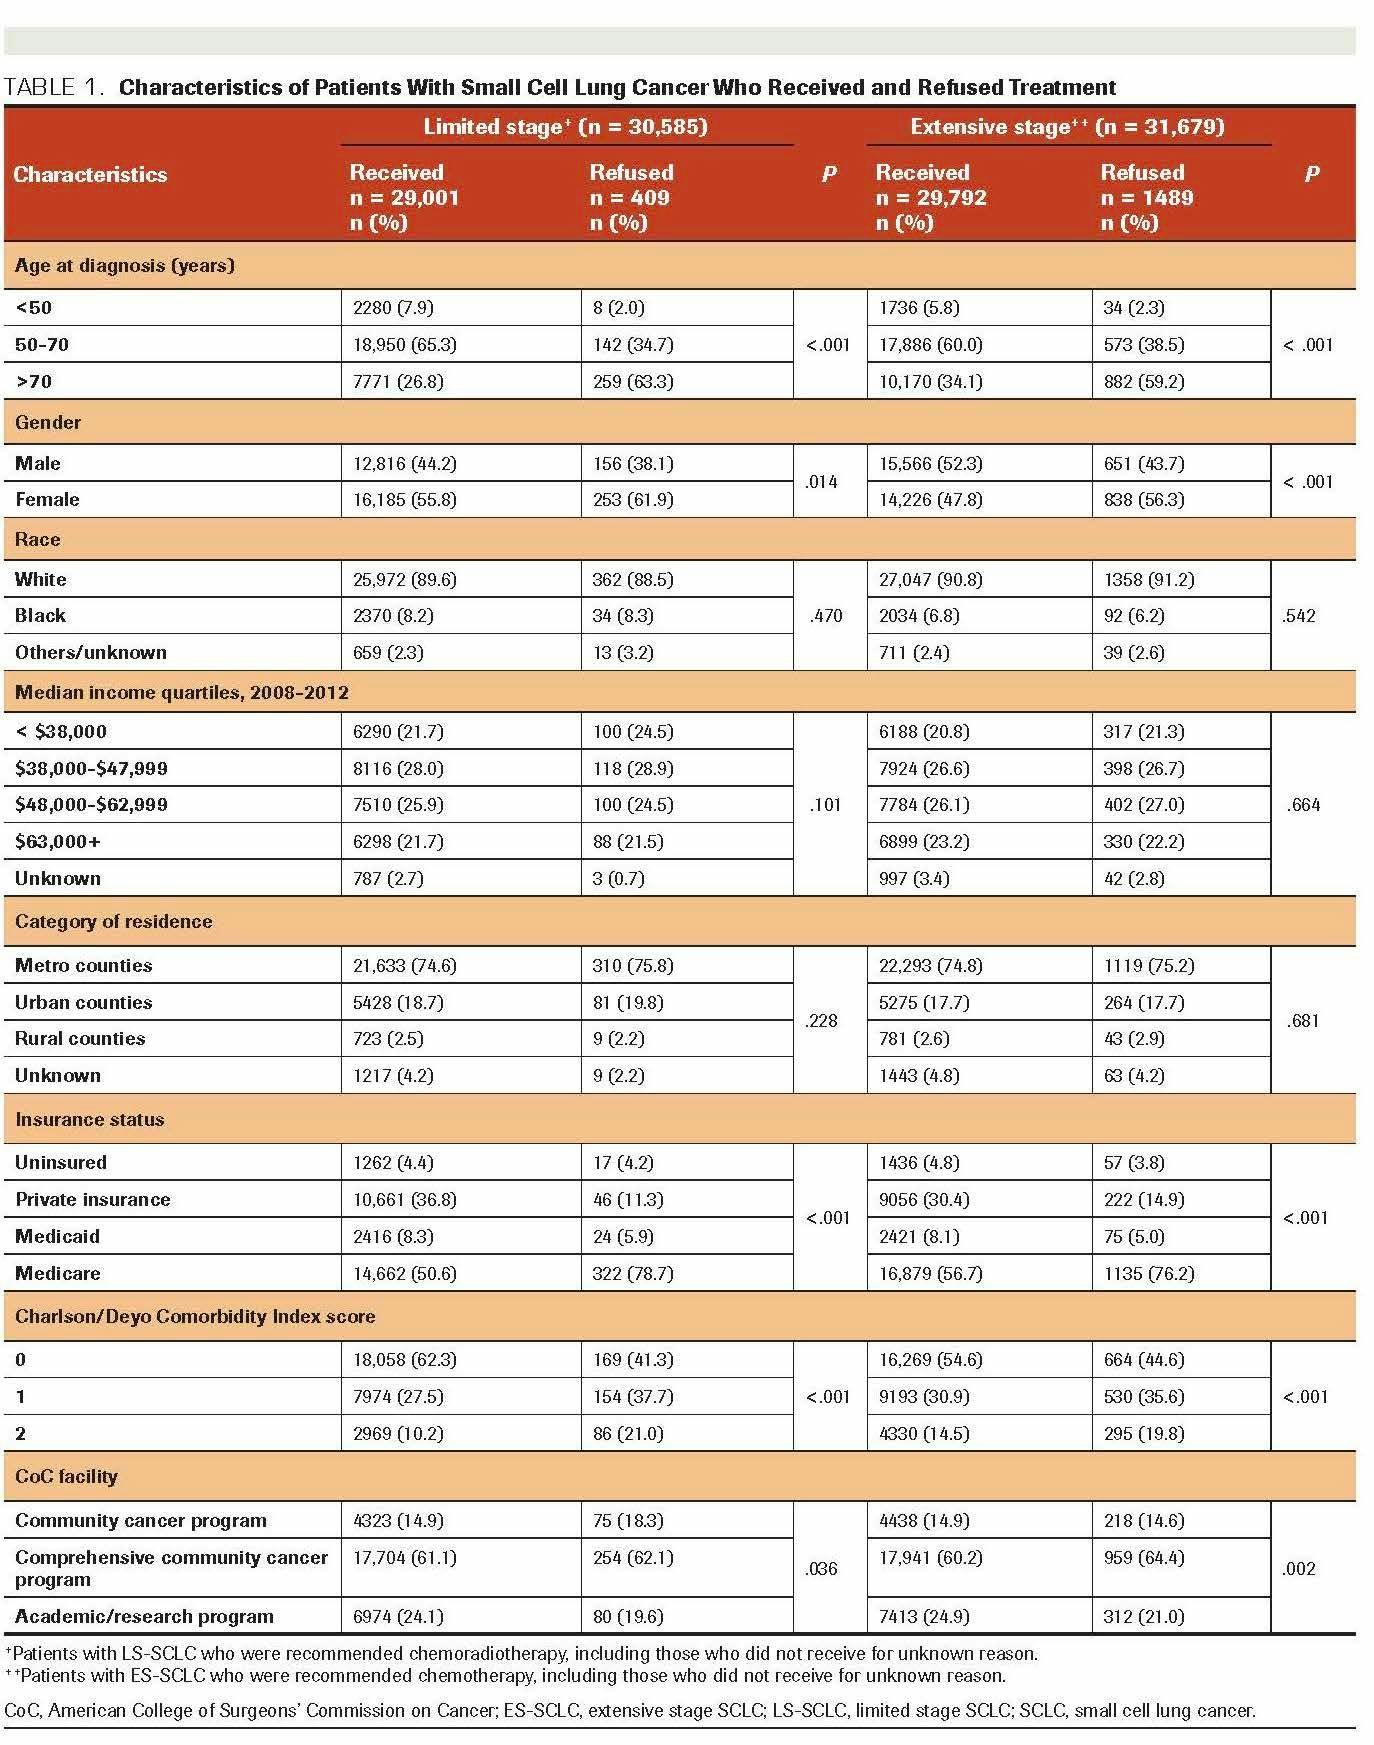 TABLE 1. Characteristics of Patients With Small Cell Lung Cancer Who Received and Refused Treatment